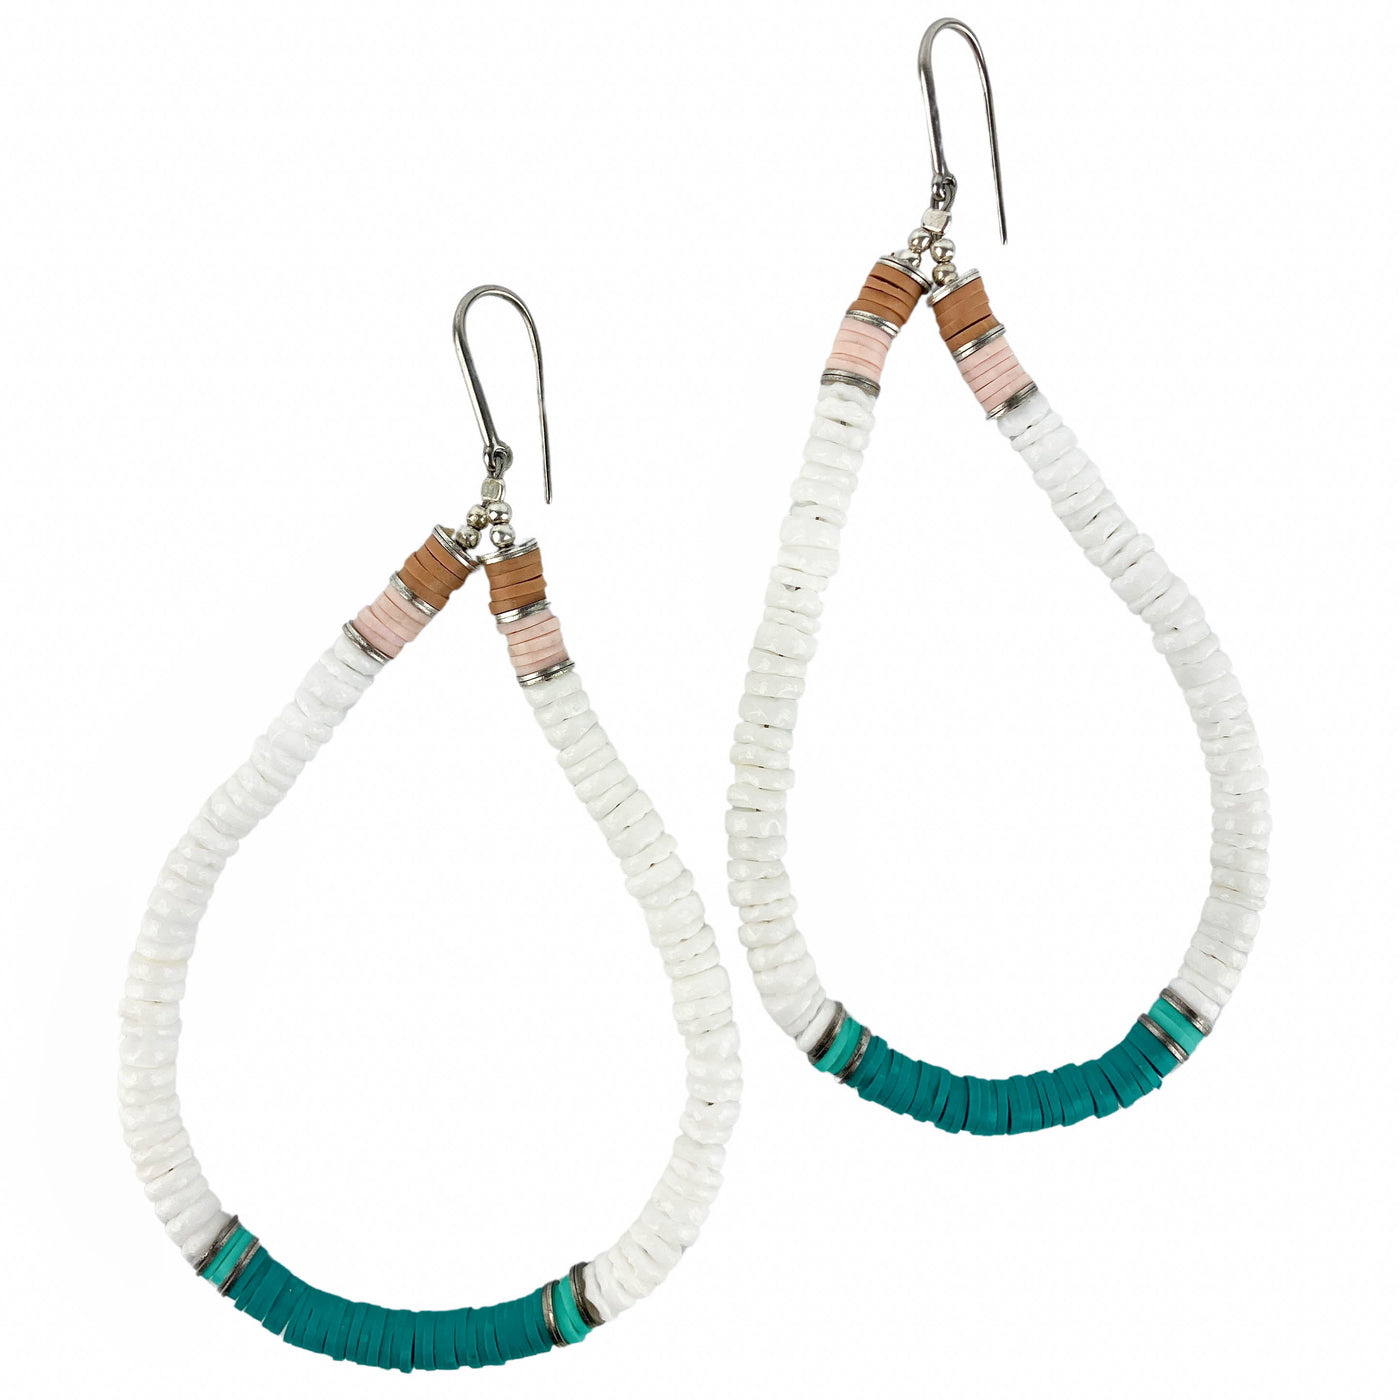 Isabel Marant Teardrop Earrings in White/Green - Discounts on Isabel Marant at UAL